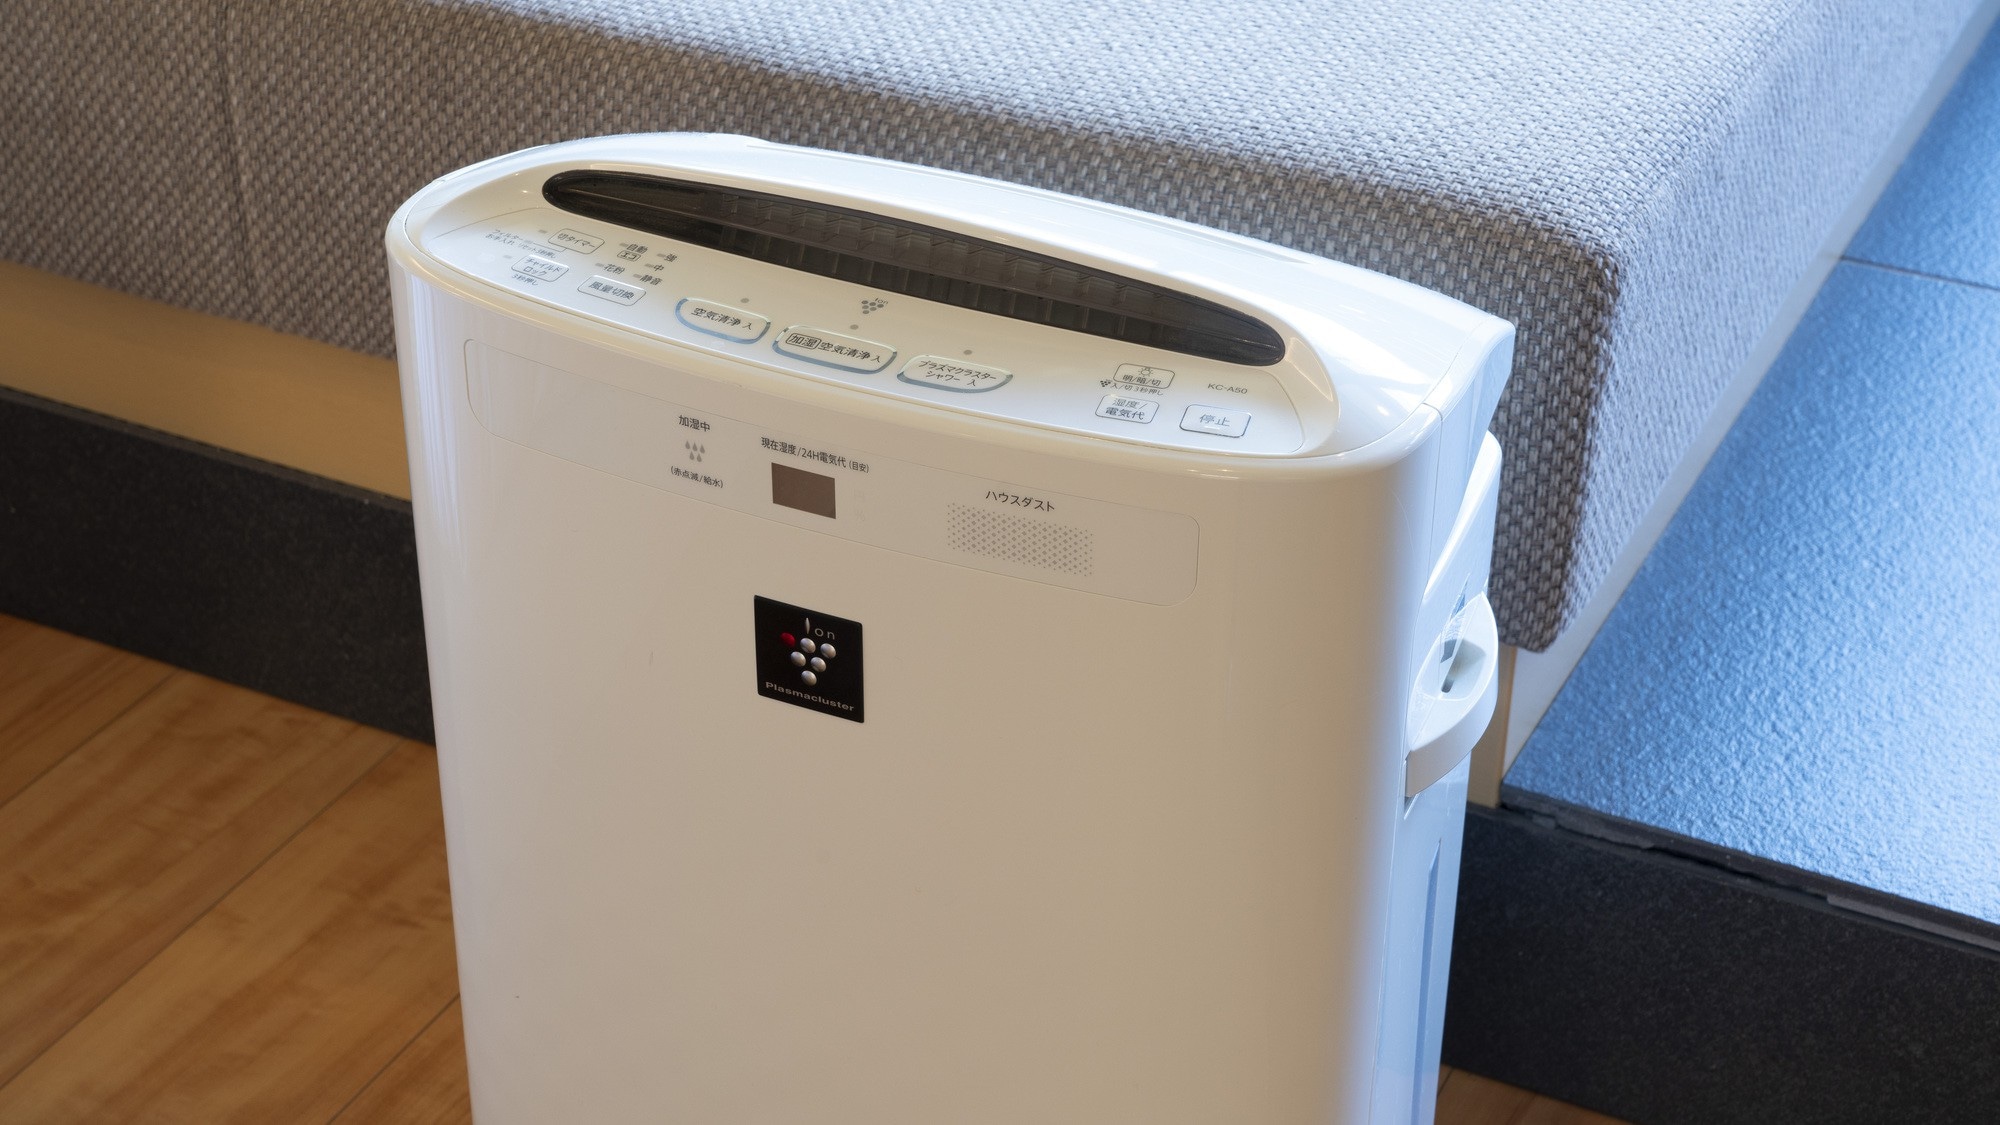 All guest rooms / air purifier with humidification function Plasmacluster installed